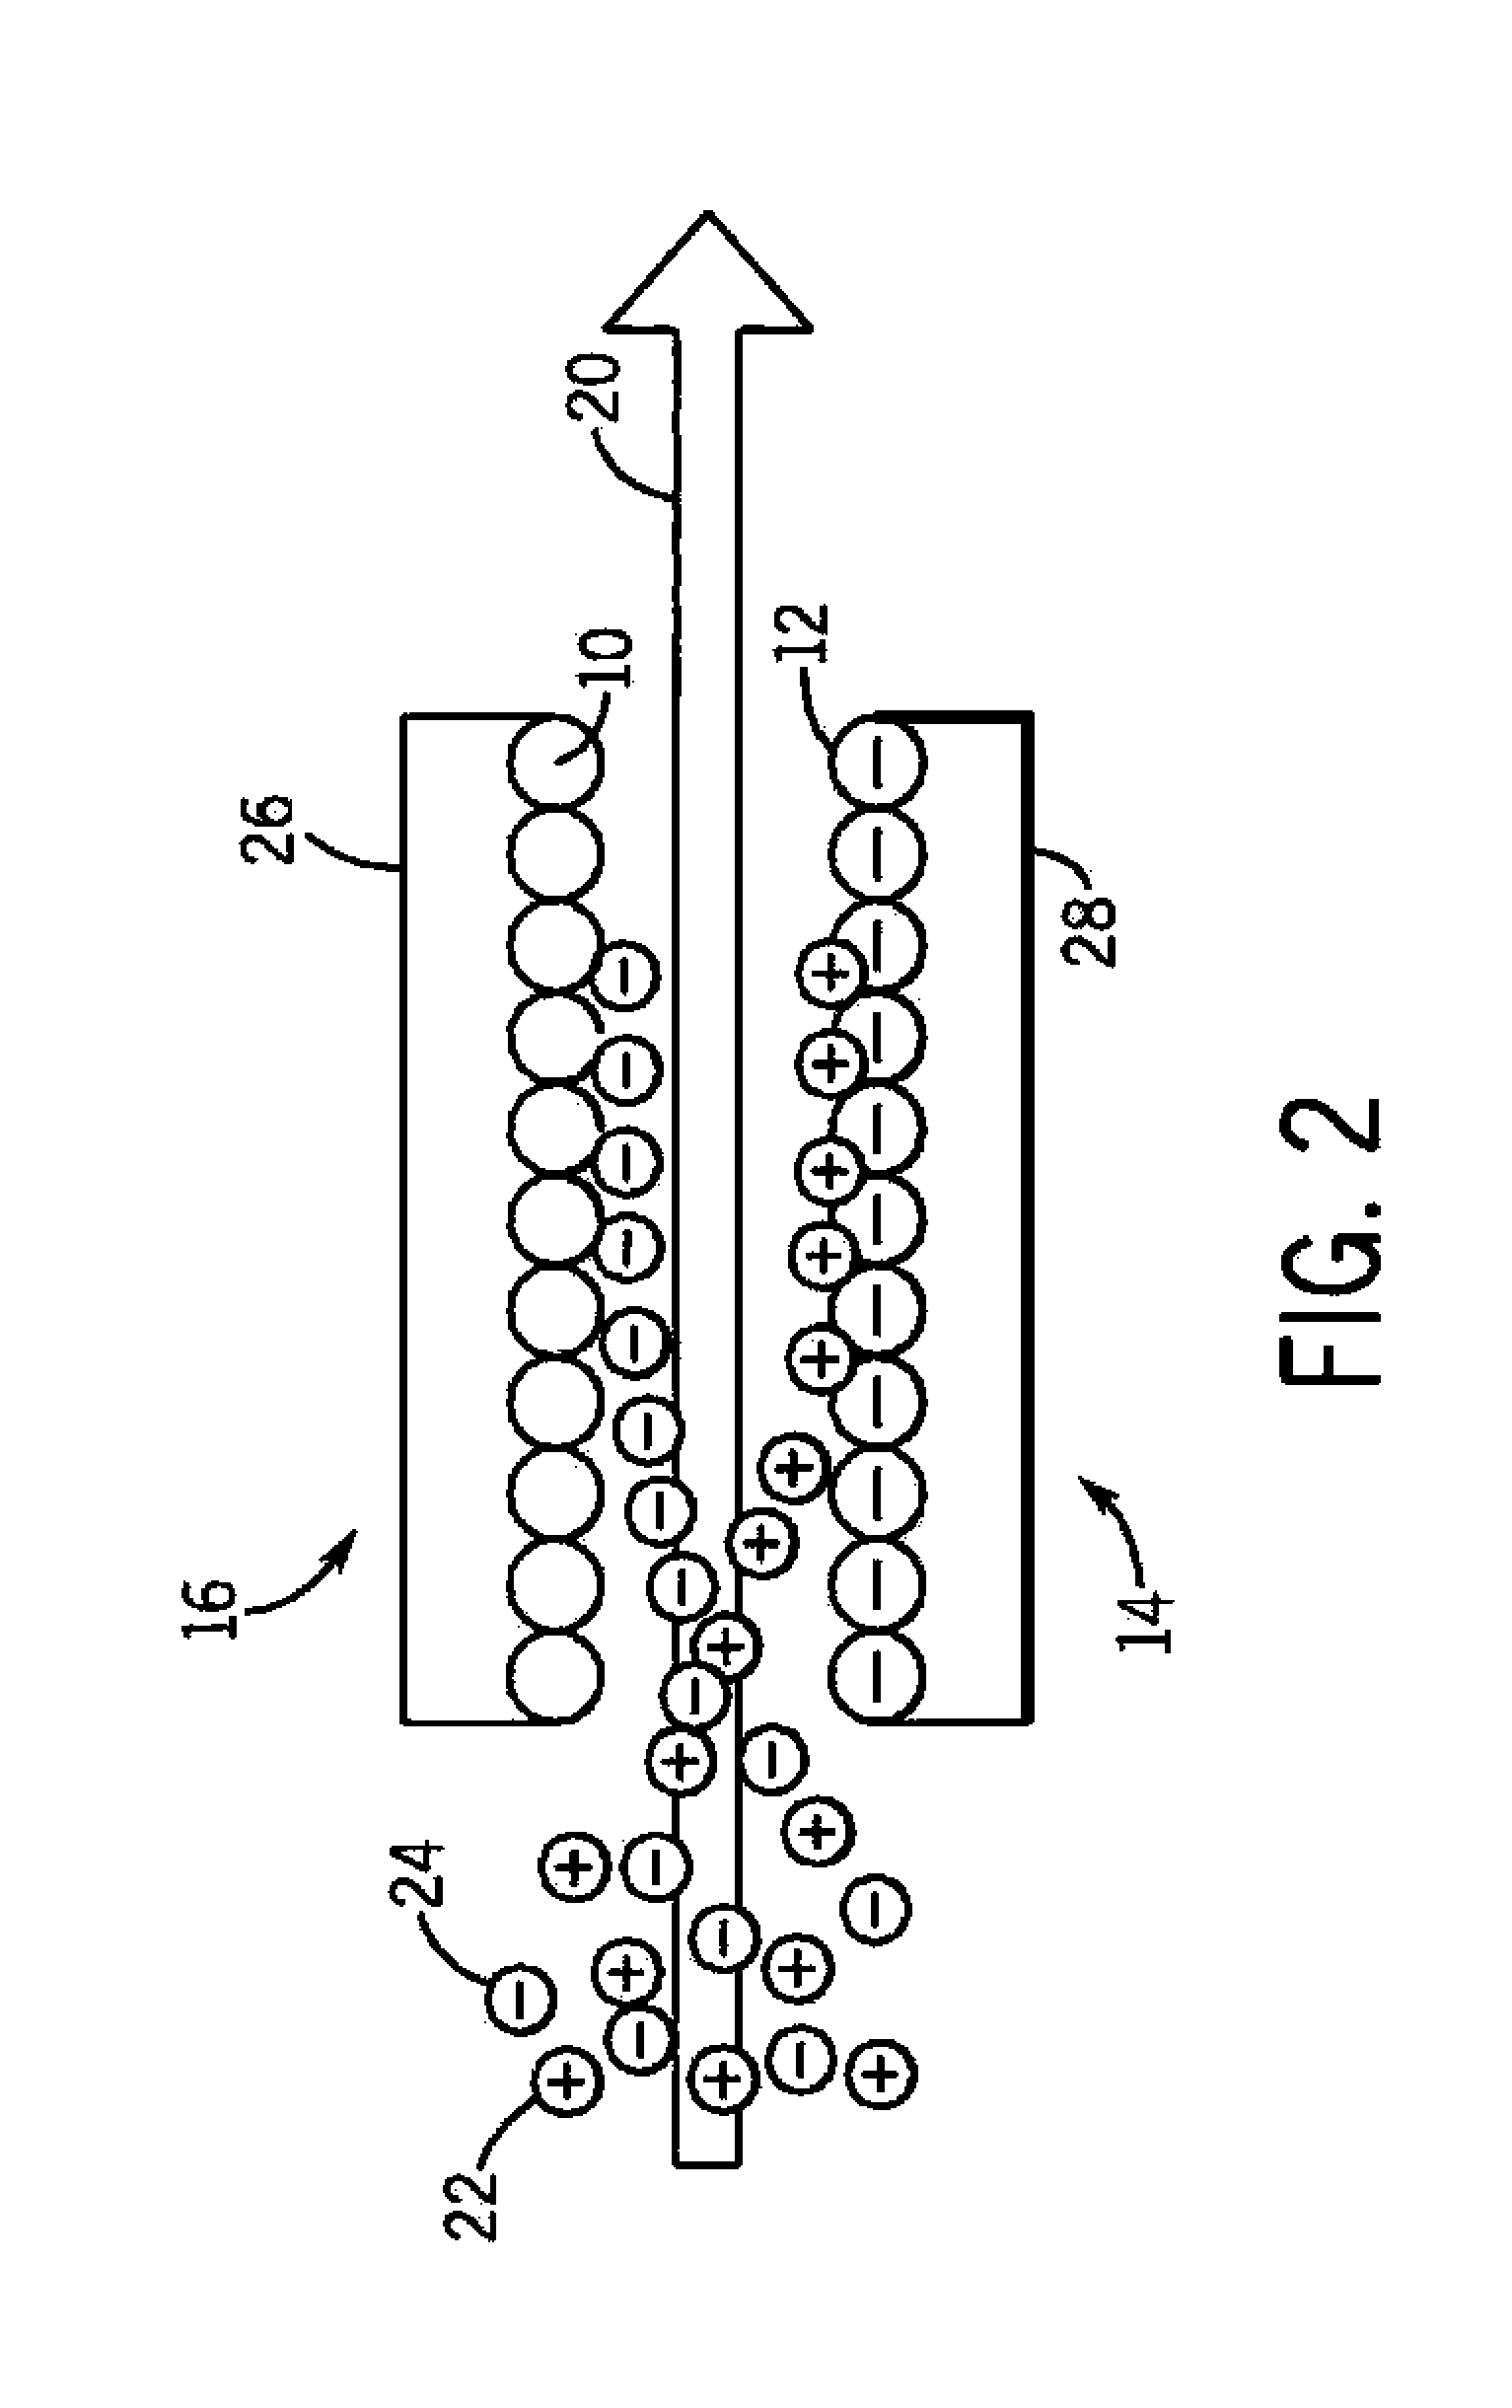 Nanoporous Insulating oxide Deionization Device Having Electrolyte Membrane, and Method of Manufacture and Use Thereof